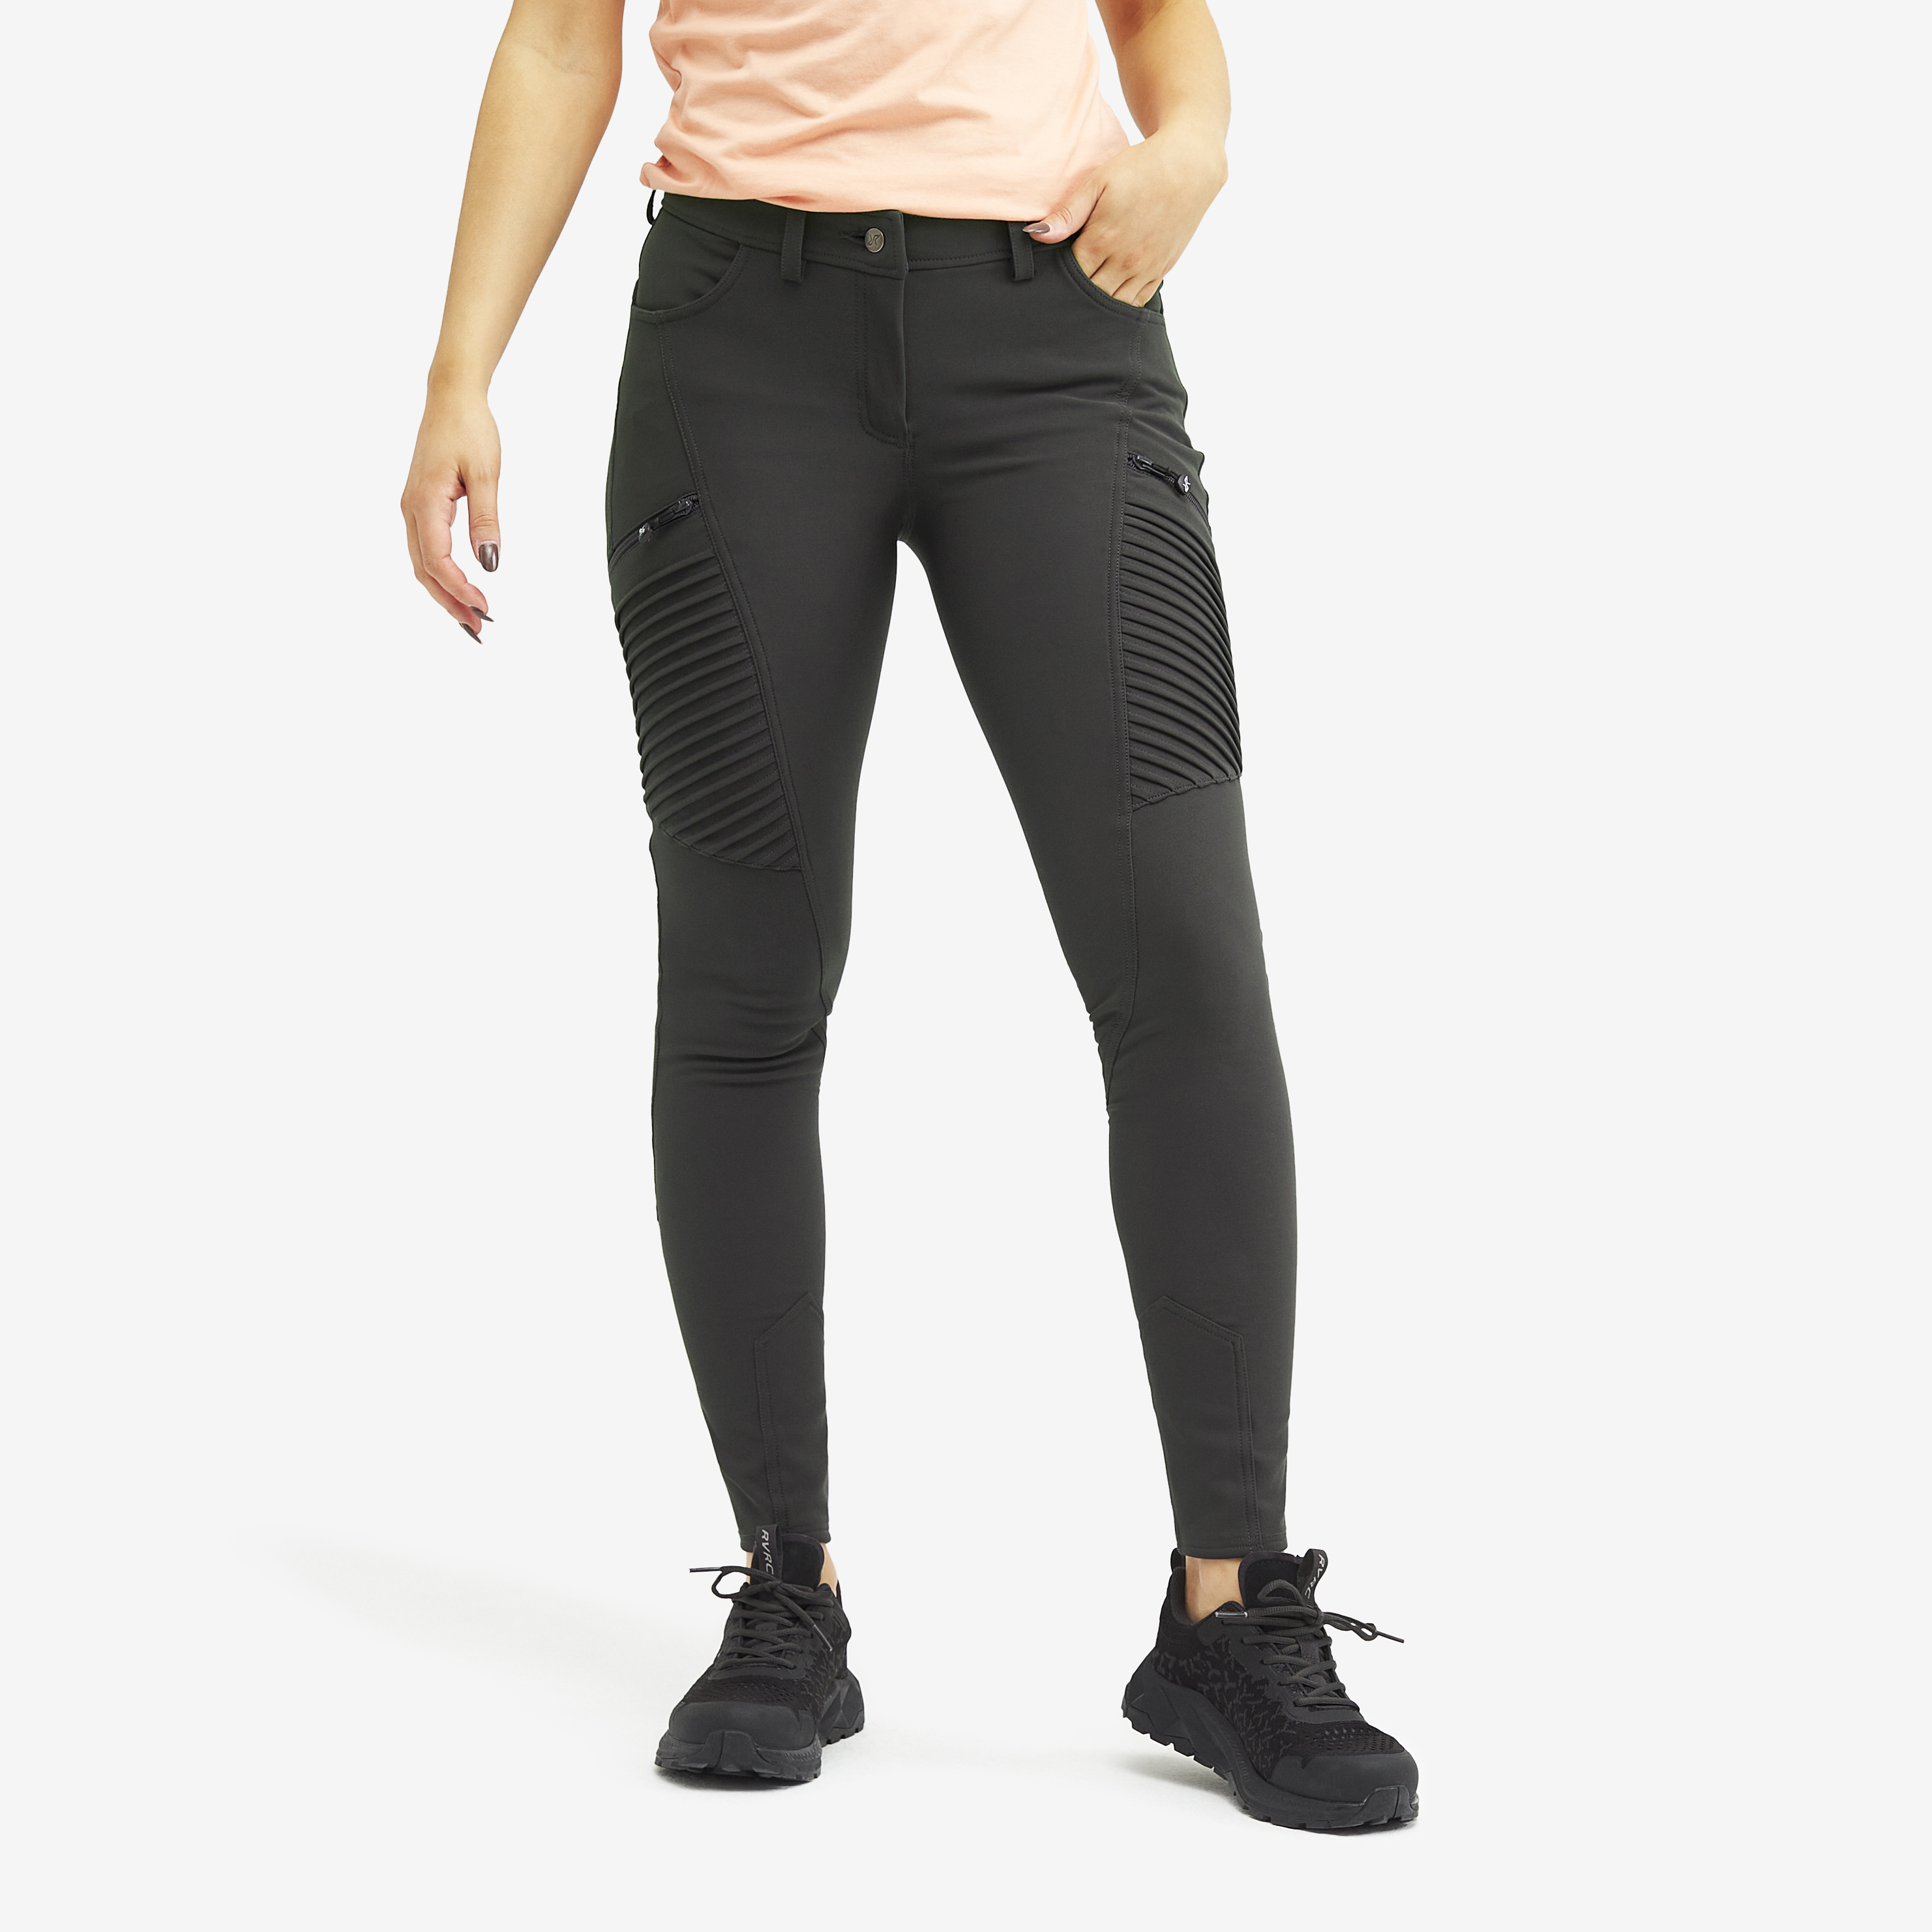 Pusher Outdoor Jeans Anthracite Mujeres